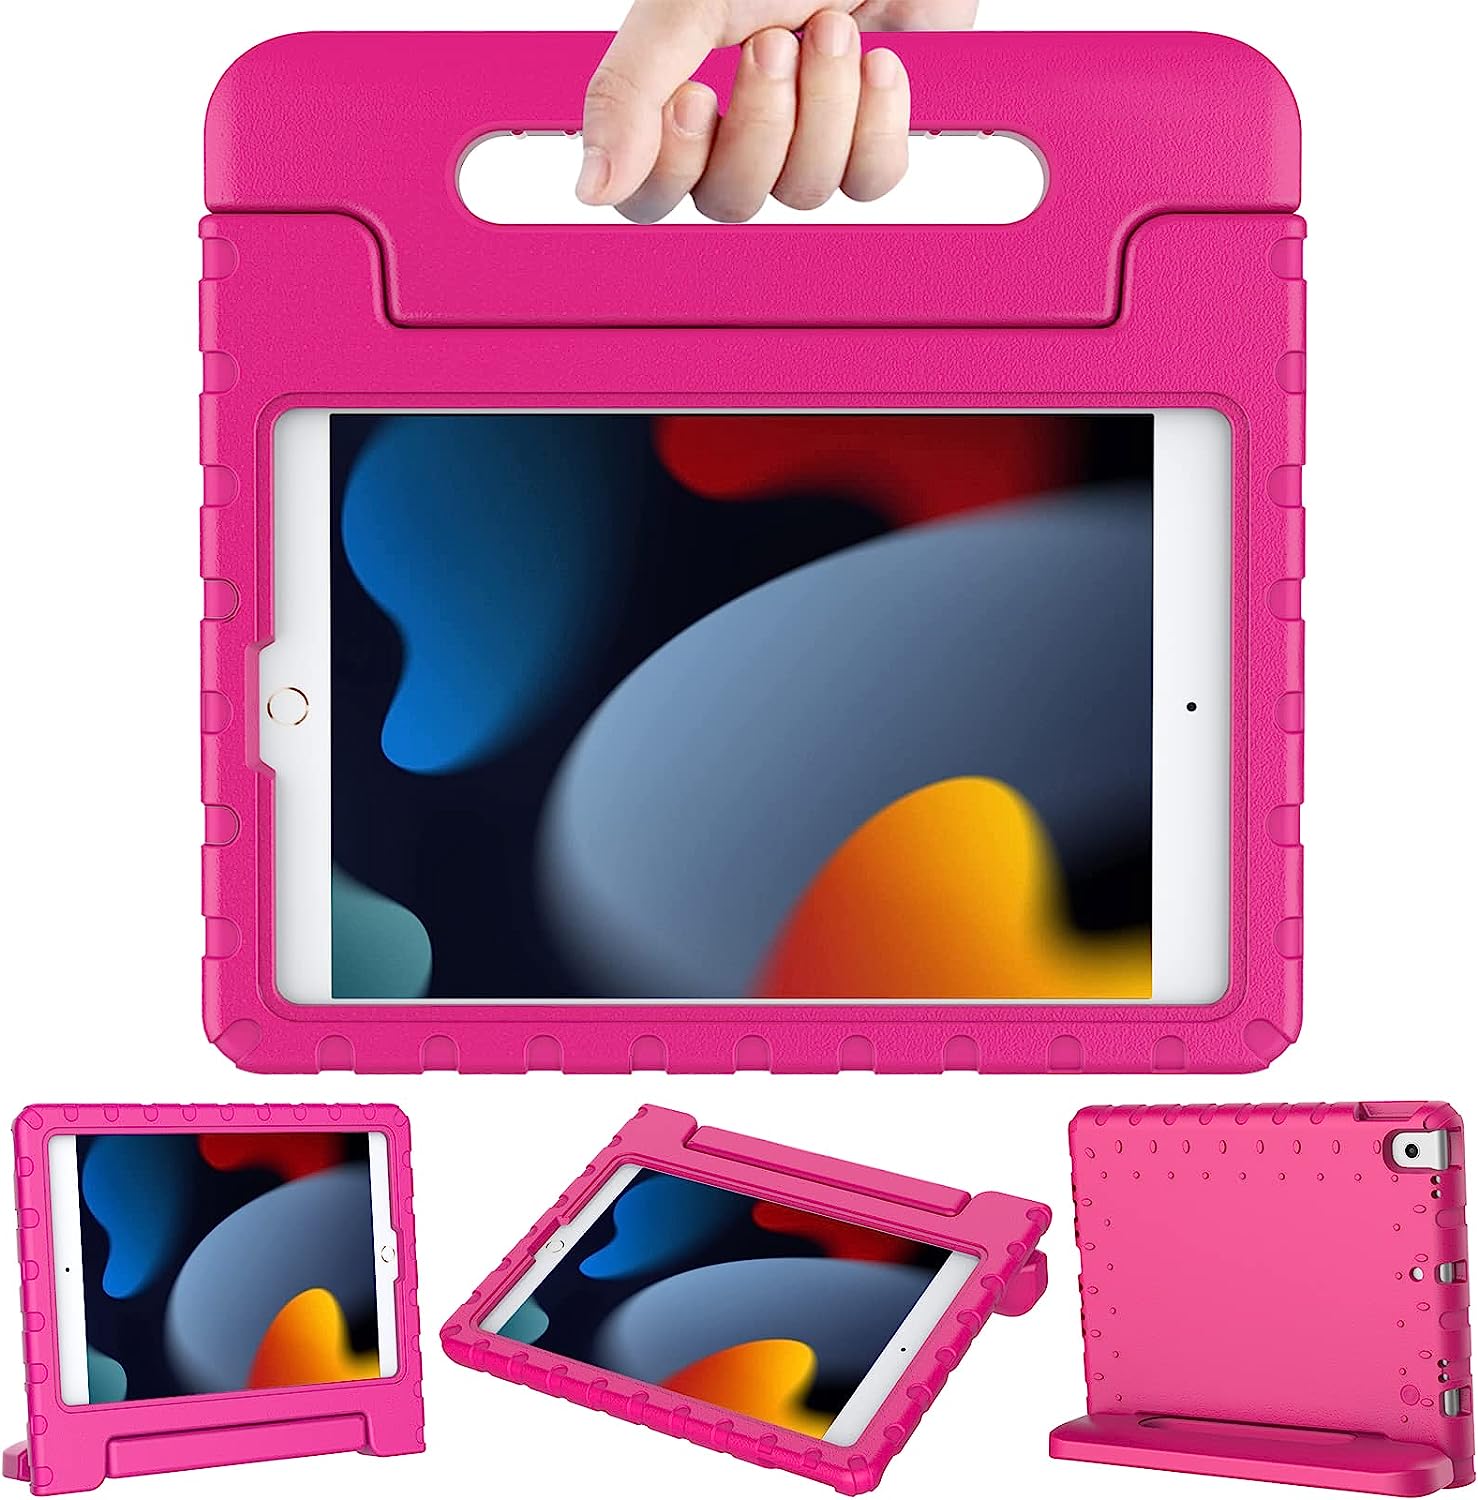 iPad 10.2 inch Shockproof Case w Handle & Stand for iPad 9th/8th/7th Gen ( Pink) *Free Shipping*